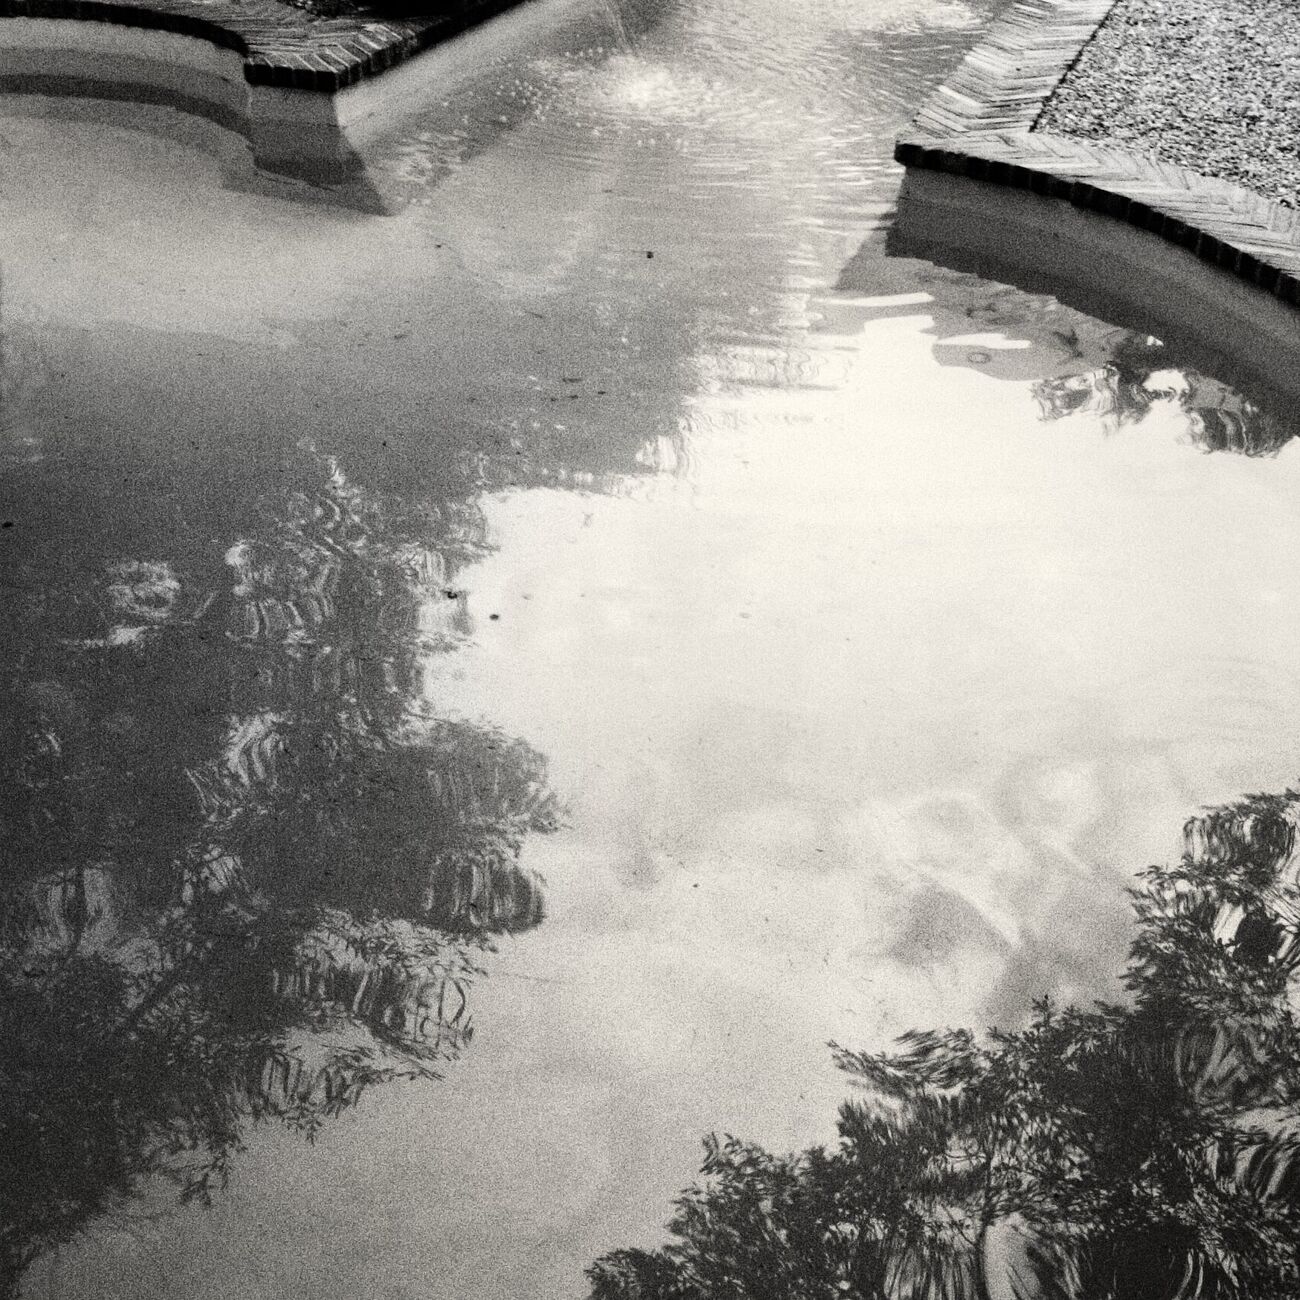 Photography 15.7 x 15.7 in, Dali's swimming pool. Ref-458-12 - Denis Olivier Art Photography